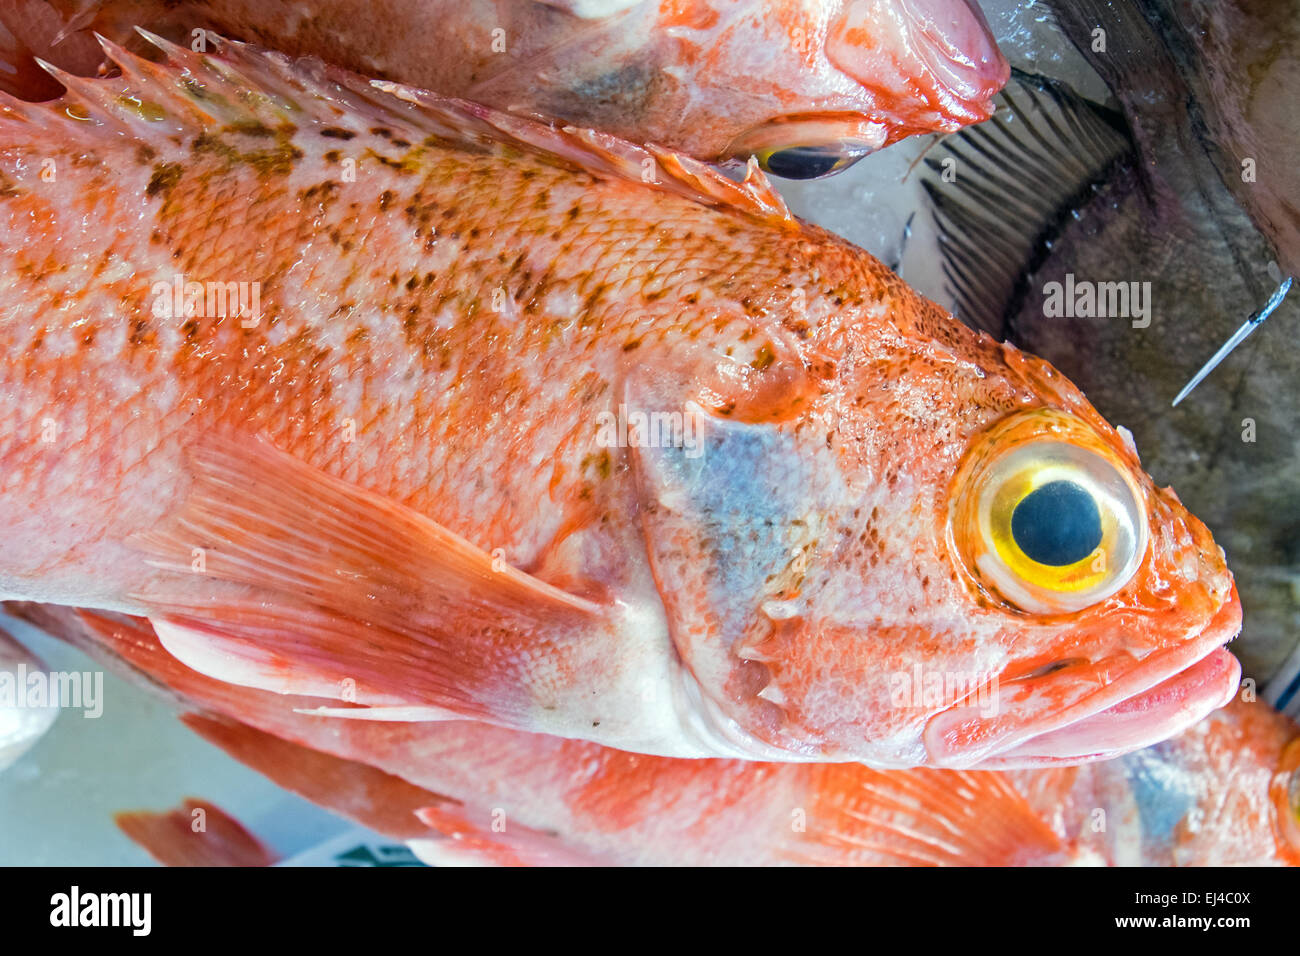 Red porgy fish for sale at a market in Portugal Stock Photo